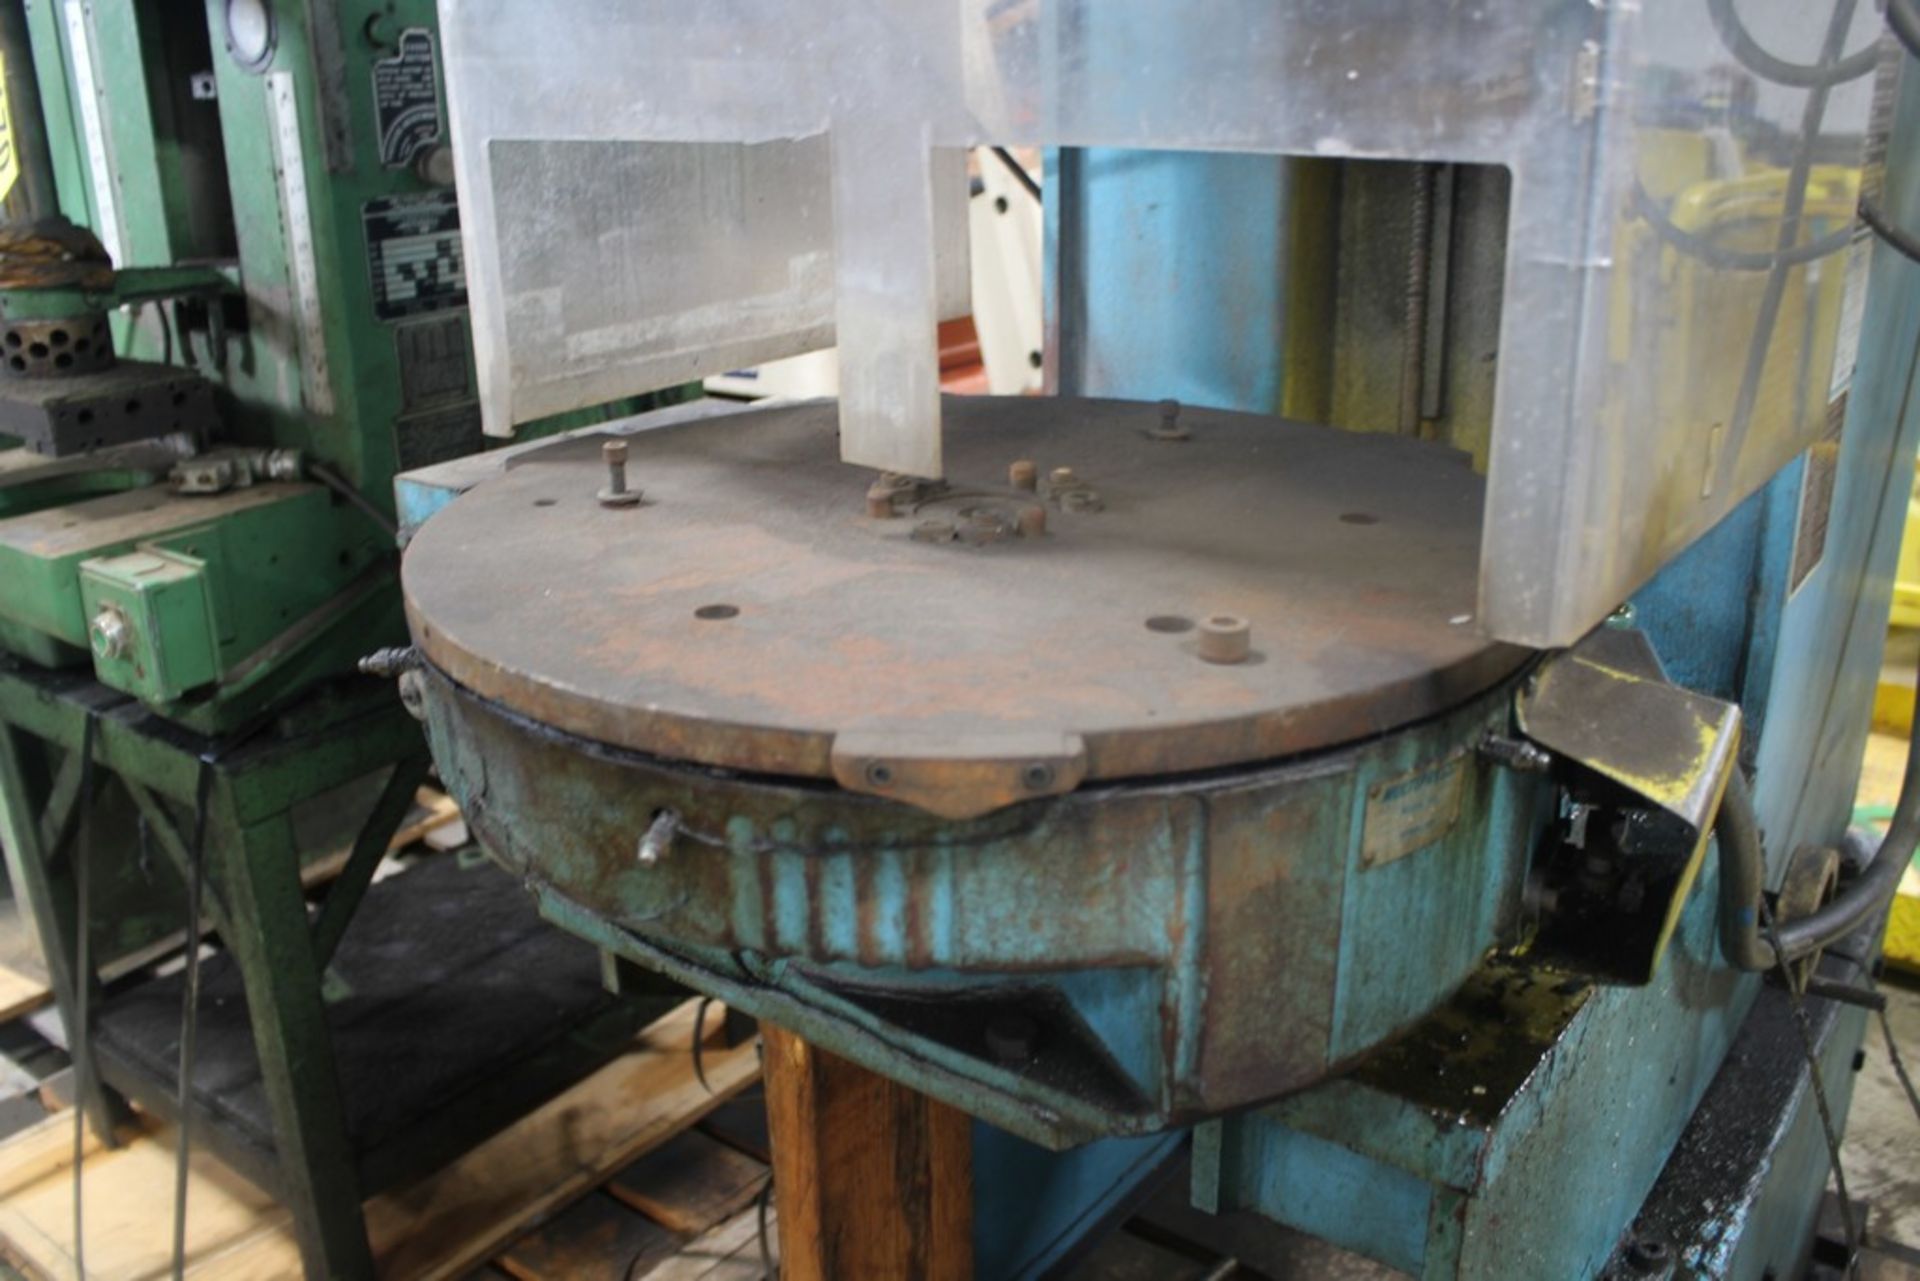 MULTIPRESS MODEL WT-100M 10 TON HYDRAULIC PRESS, WITH MODEL IT-103 INDEX TABLE, S/N 30208 - Image 6 of 8